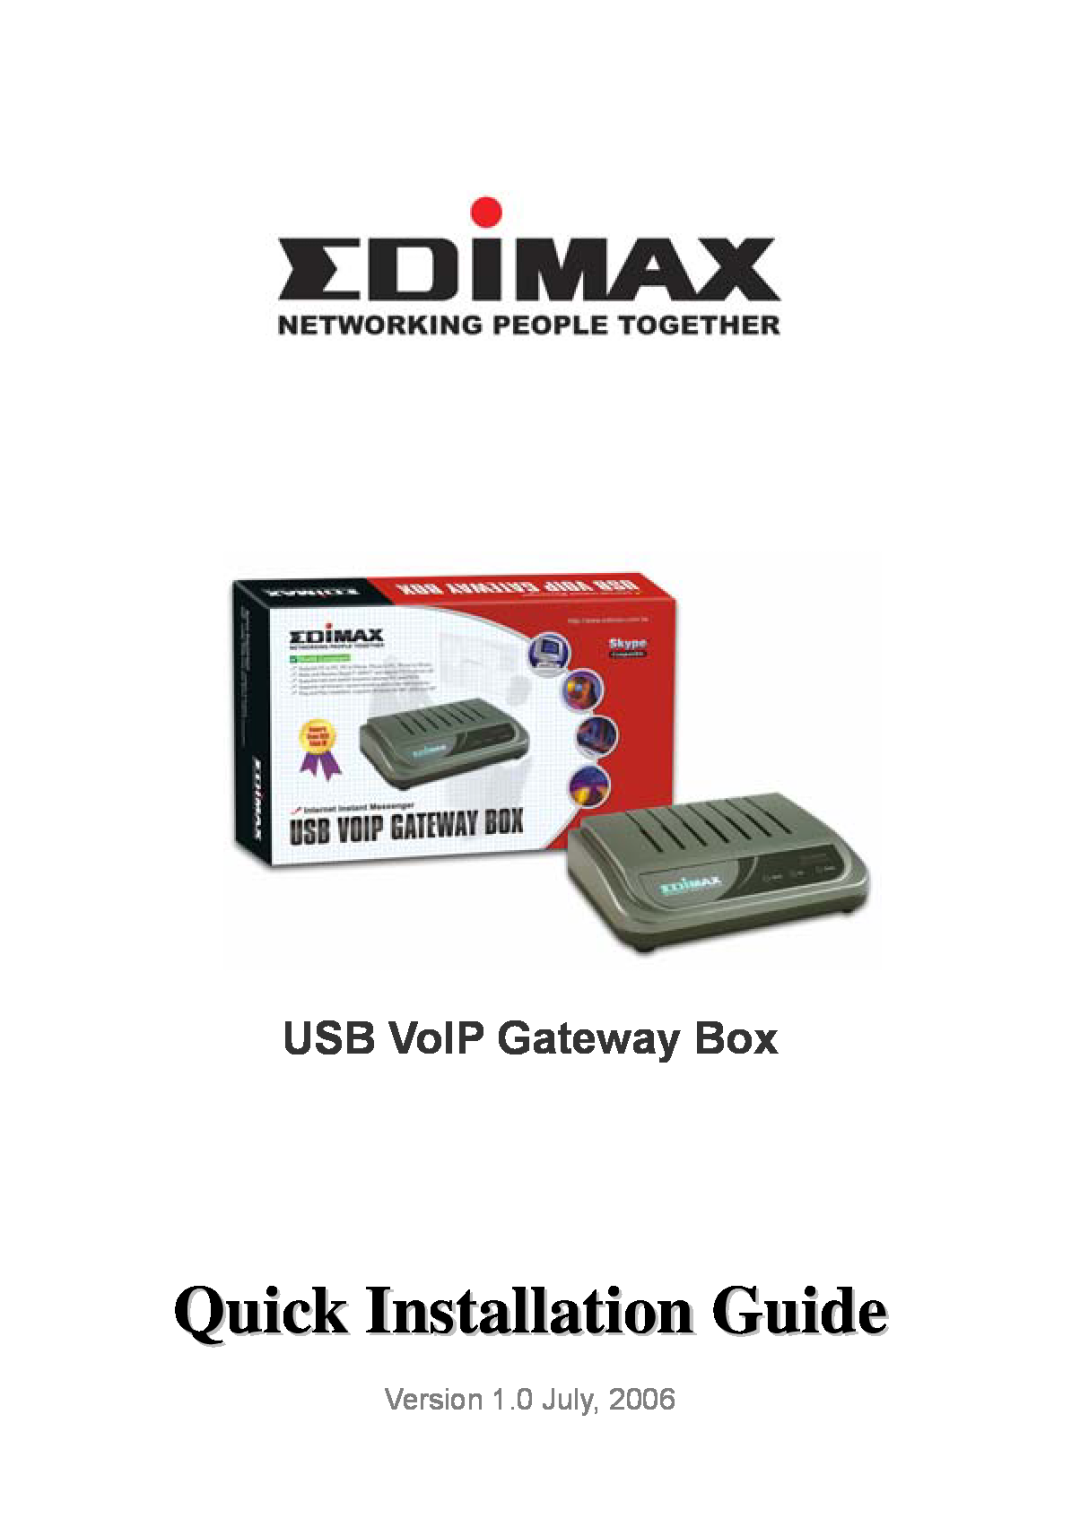 Edimax Technology None manual Quick Installation Guide, USB VoIP Gateway Box, Version 1.0 July 